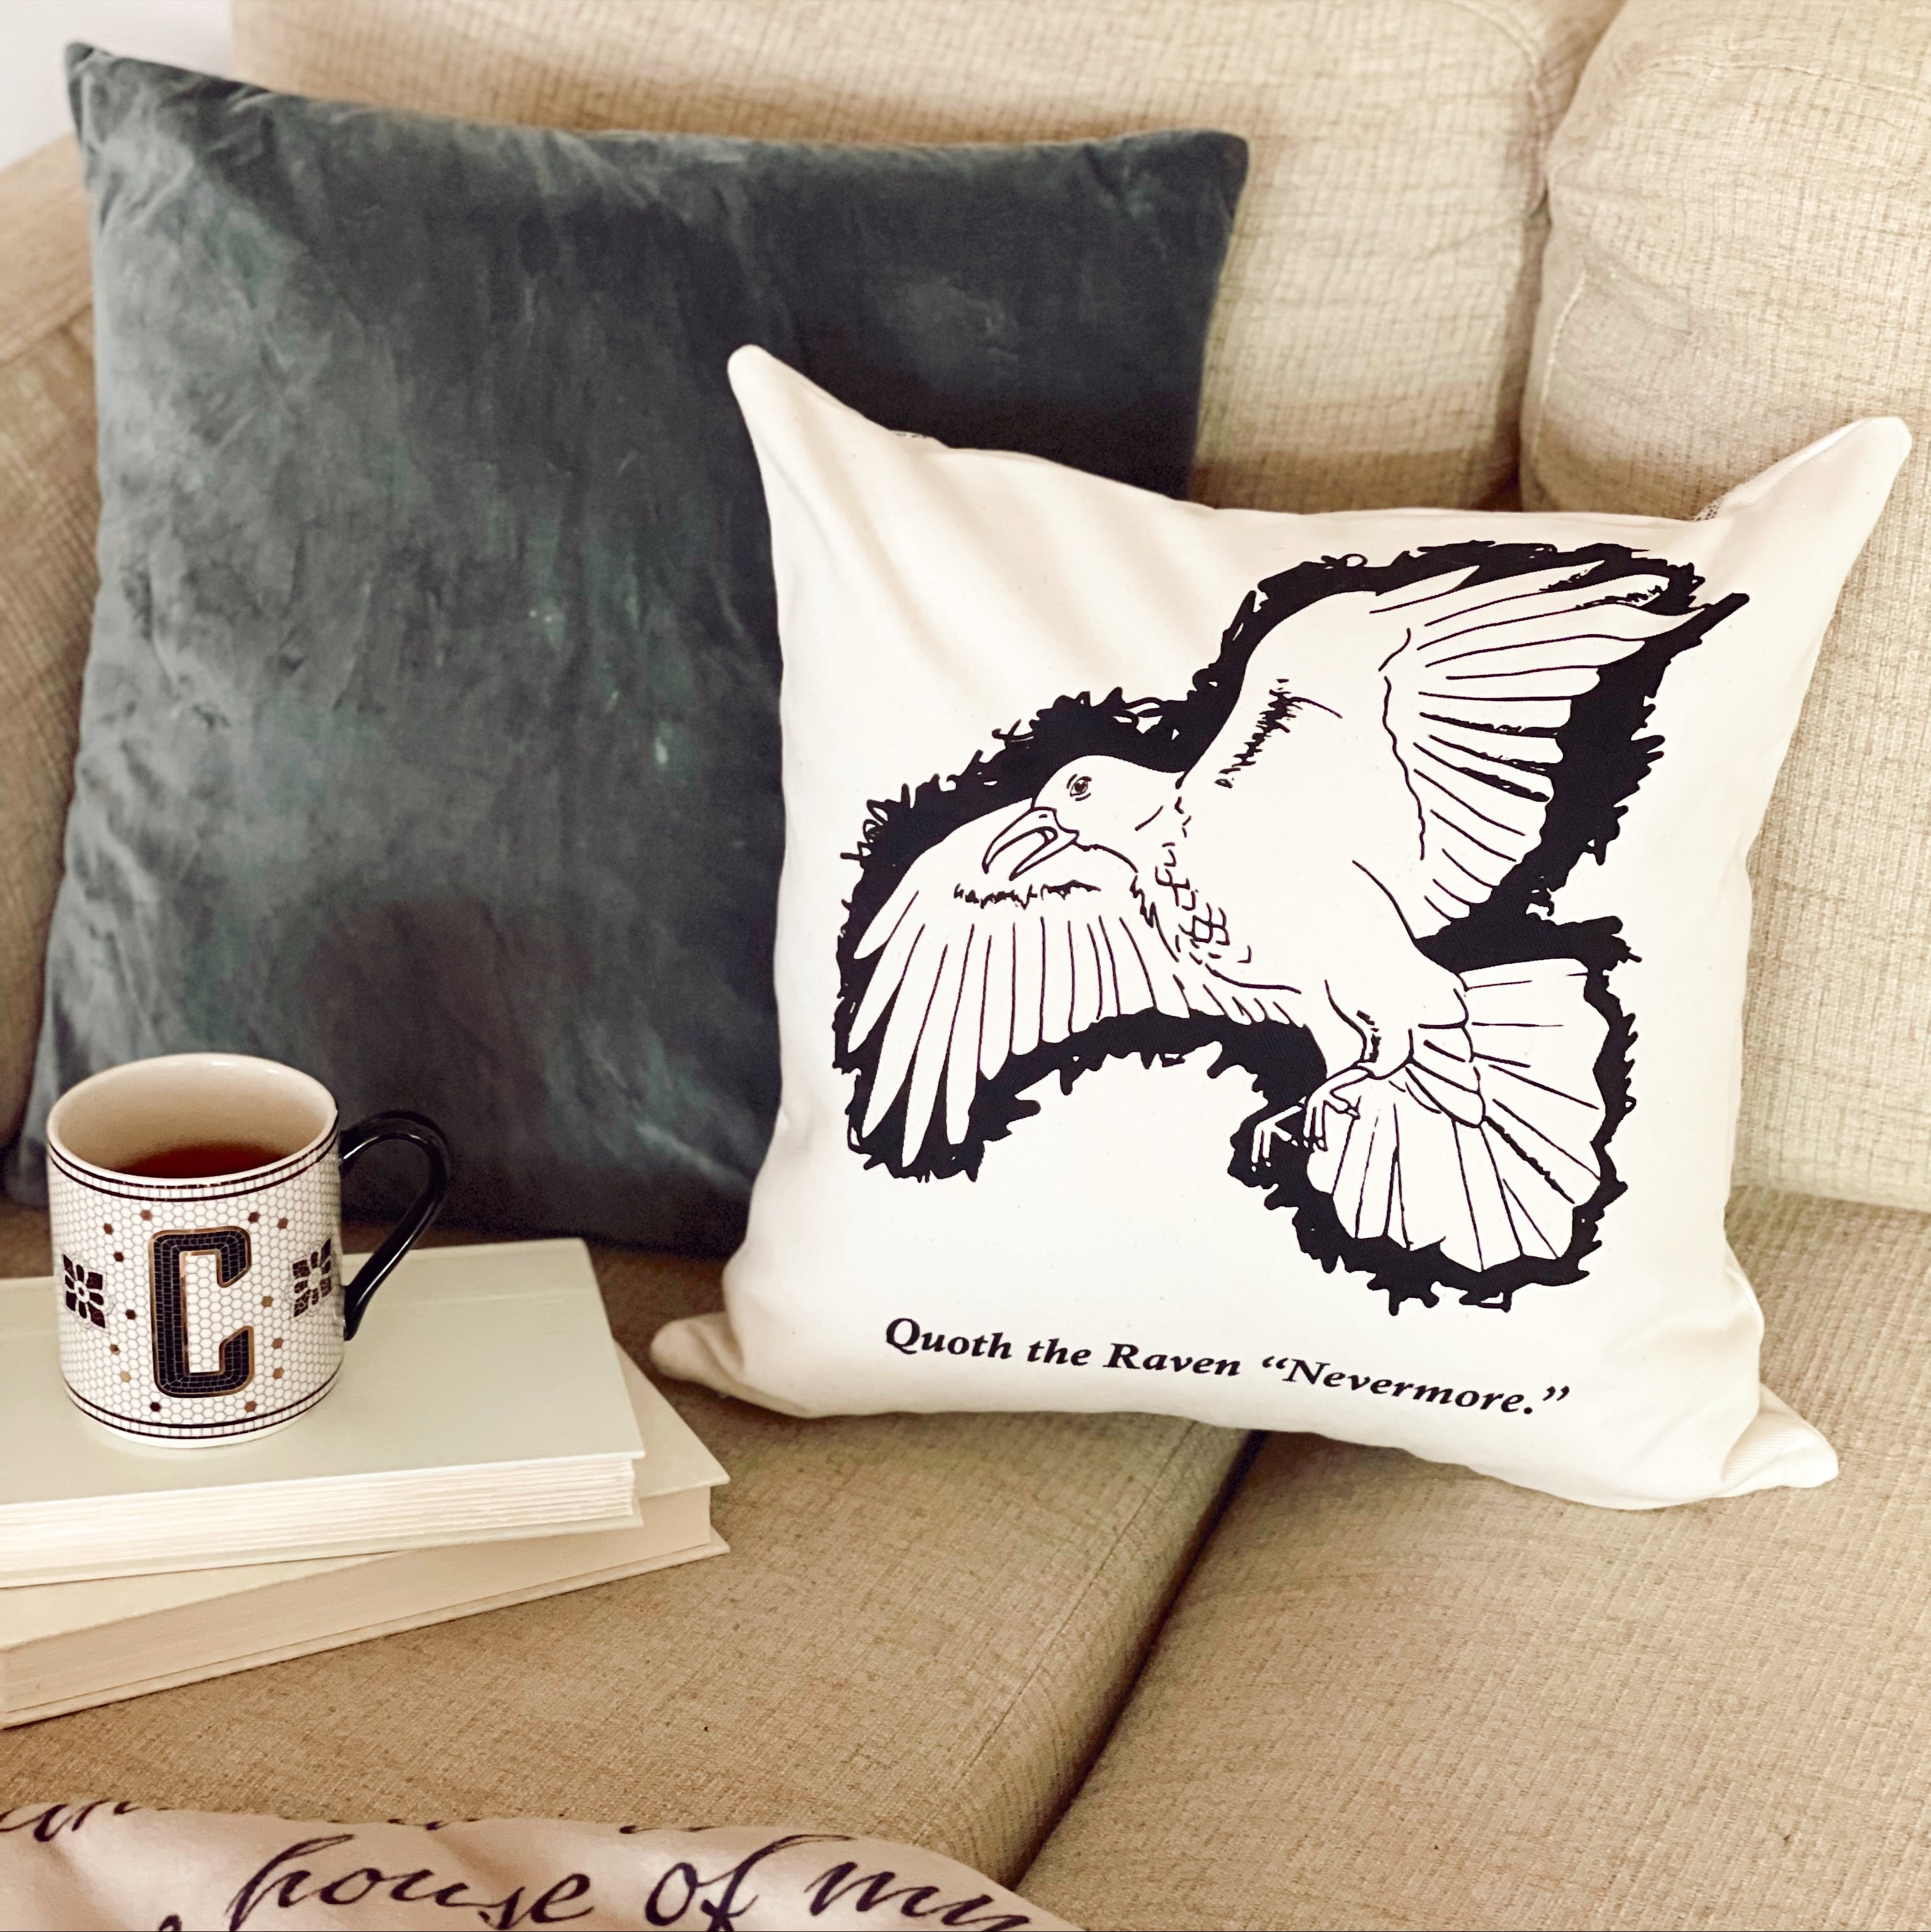 Throw Pillows Made From Napkins - The Chronicles of Home